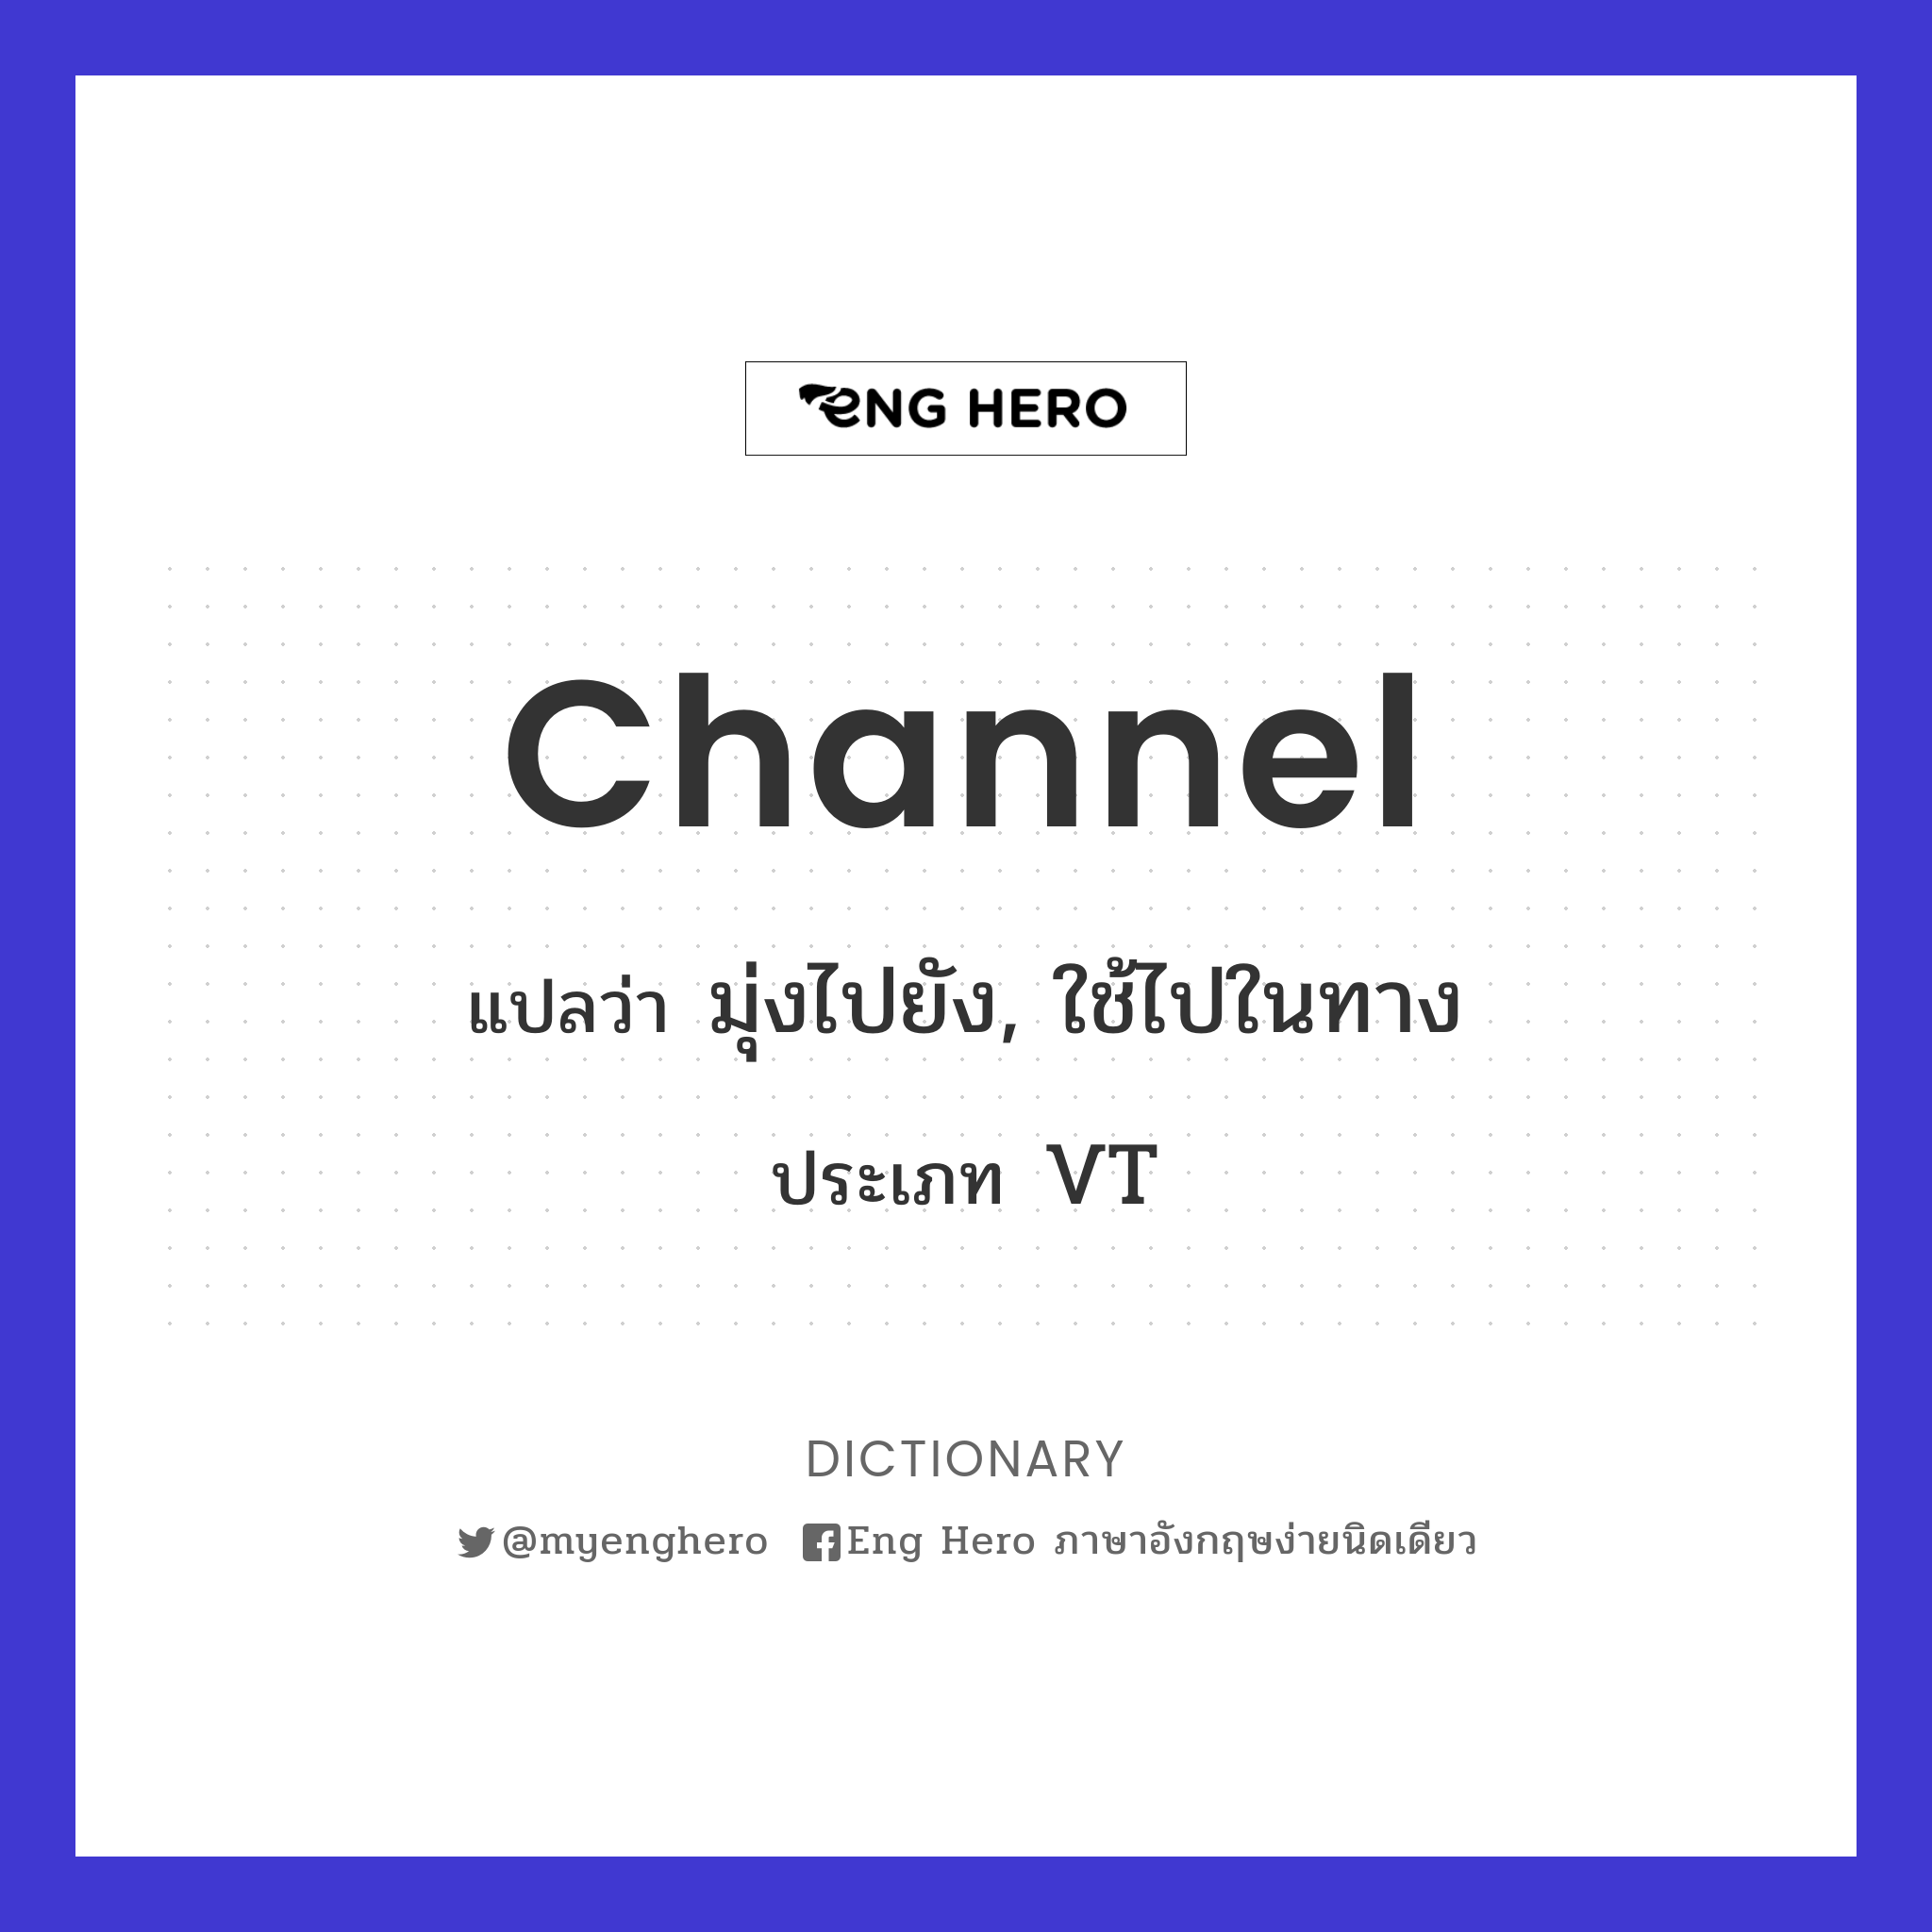 channel